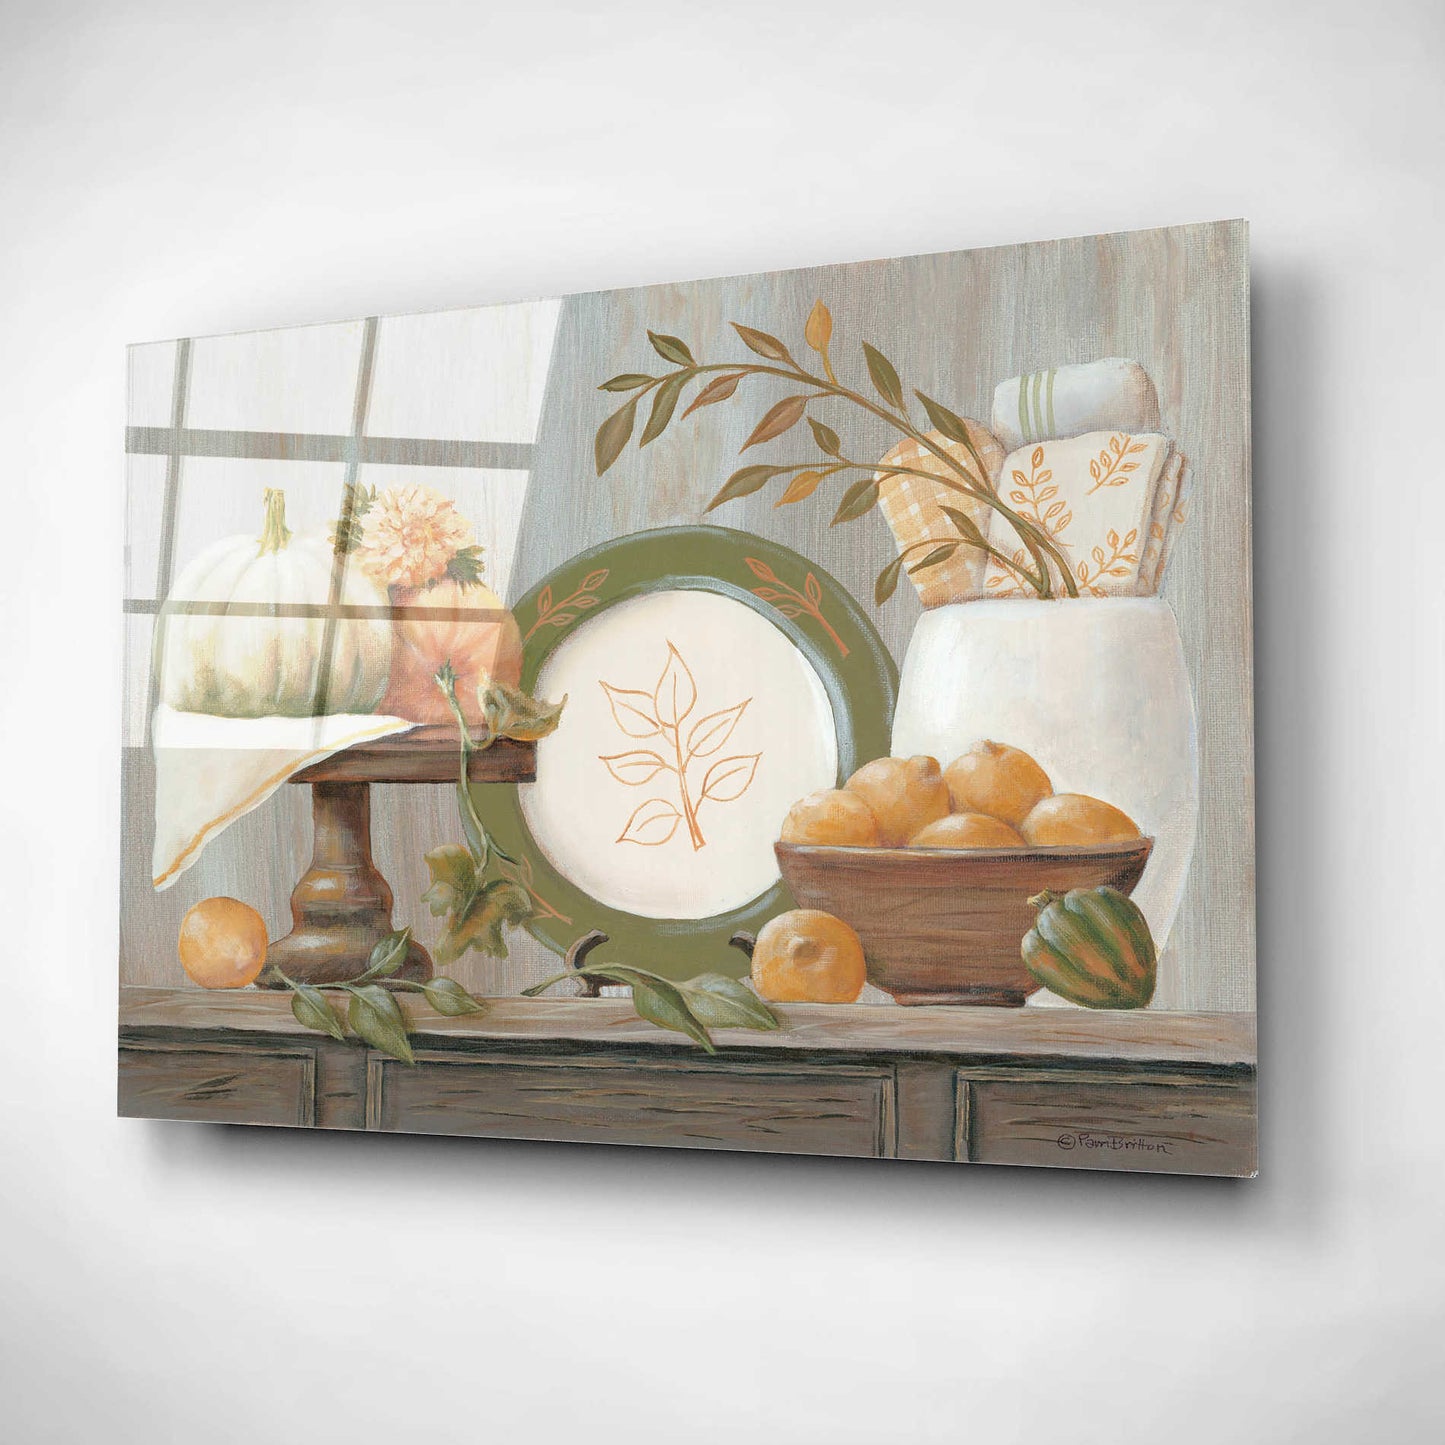 Epic Art 'A Harvest Kitchen' by Pam Britton, Acrylic Glass Wall Art,16x12